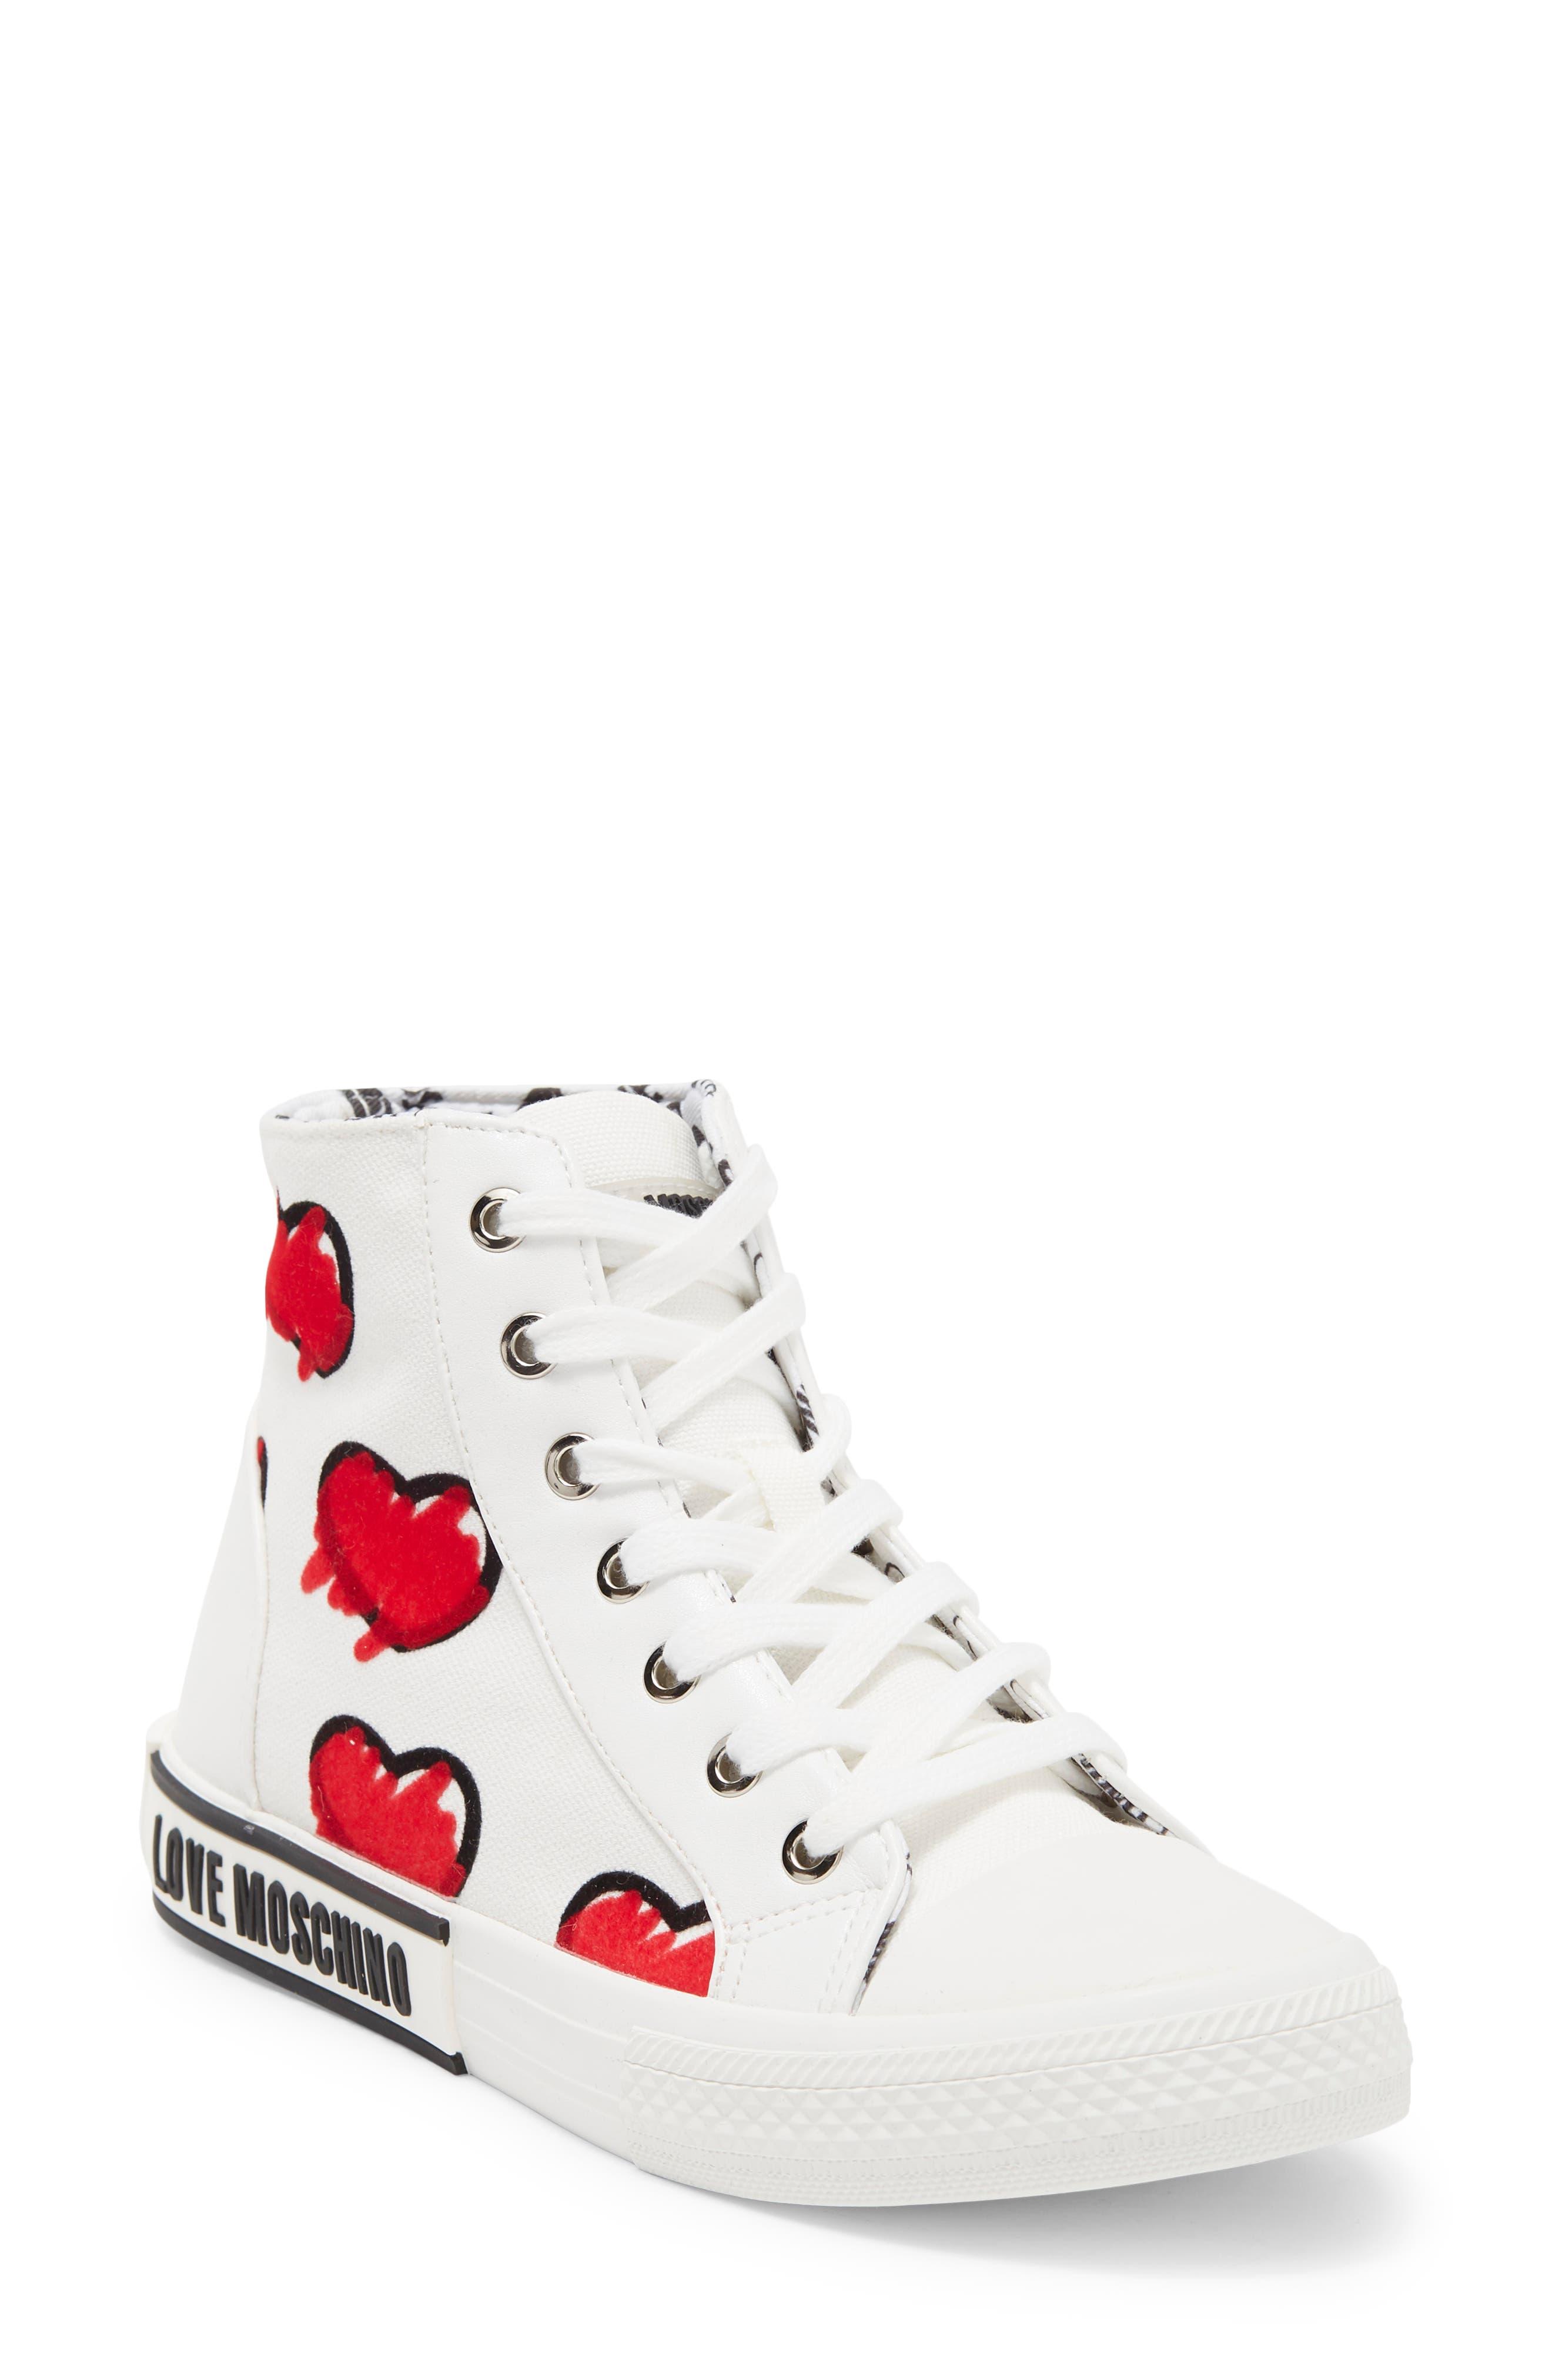 Love Moschino Heart Canvas High Top Sneaker in White | Lyst